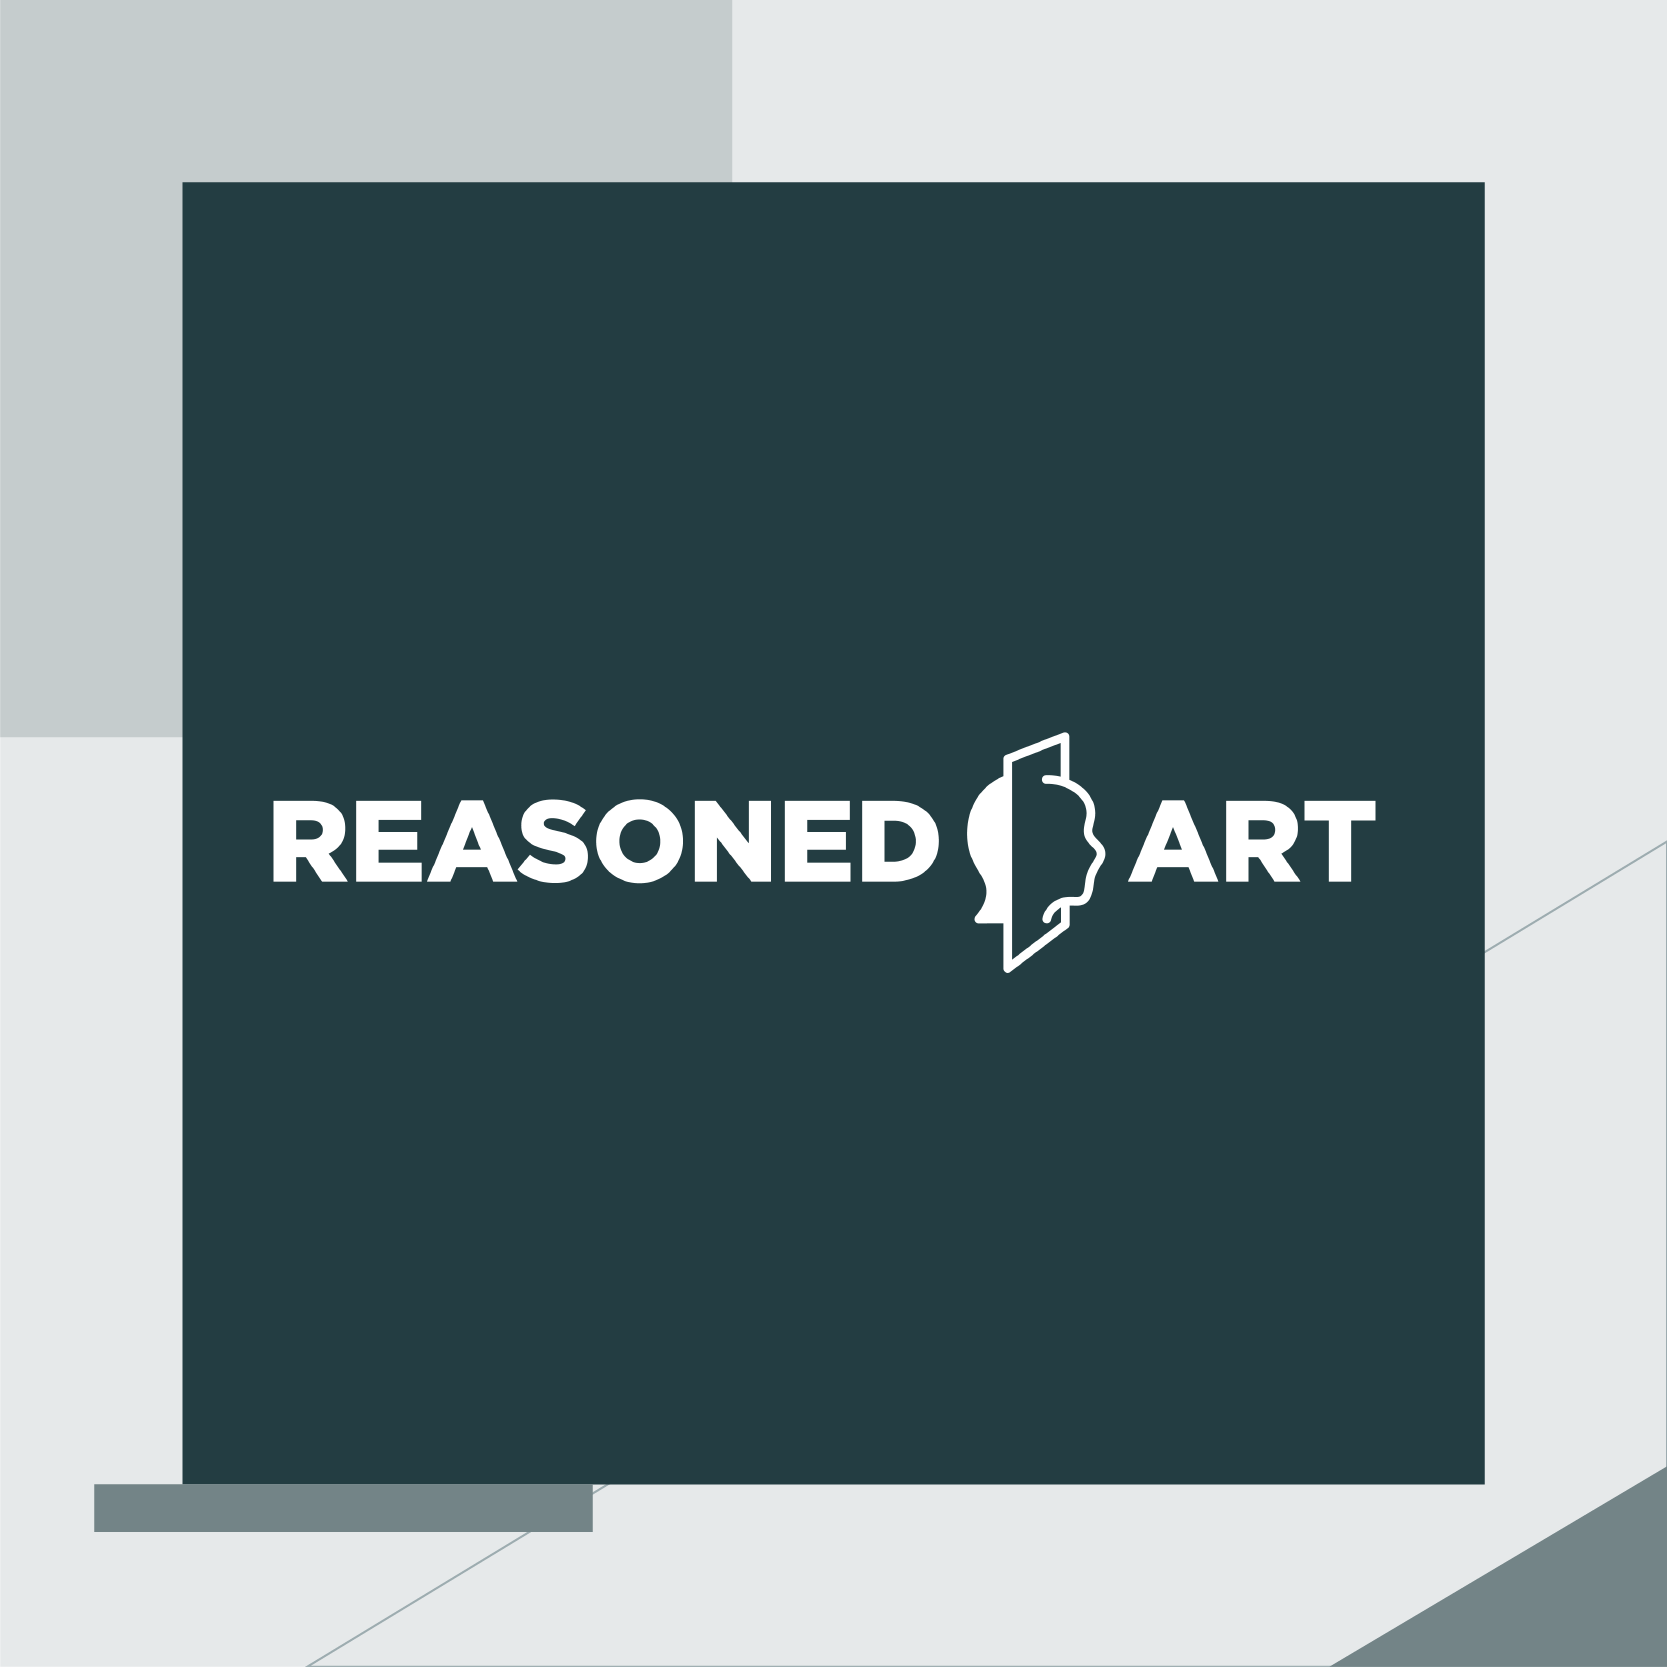 Reasoned Art, the italian cryptoart gallery enters Luiss EnLabs – the acceleration program by LVenture Group – closing a € 310K investment round